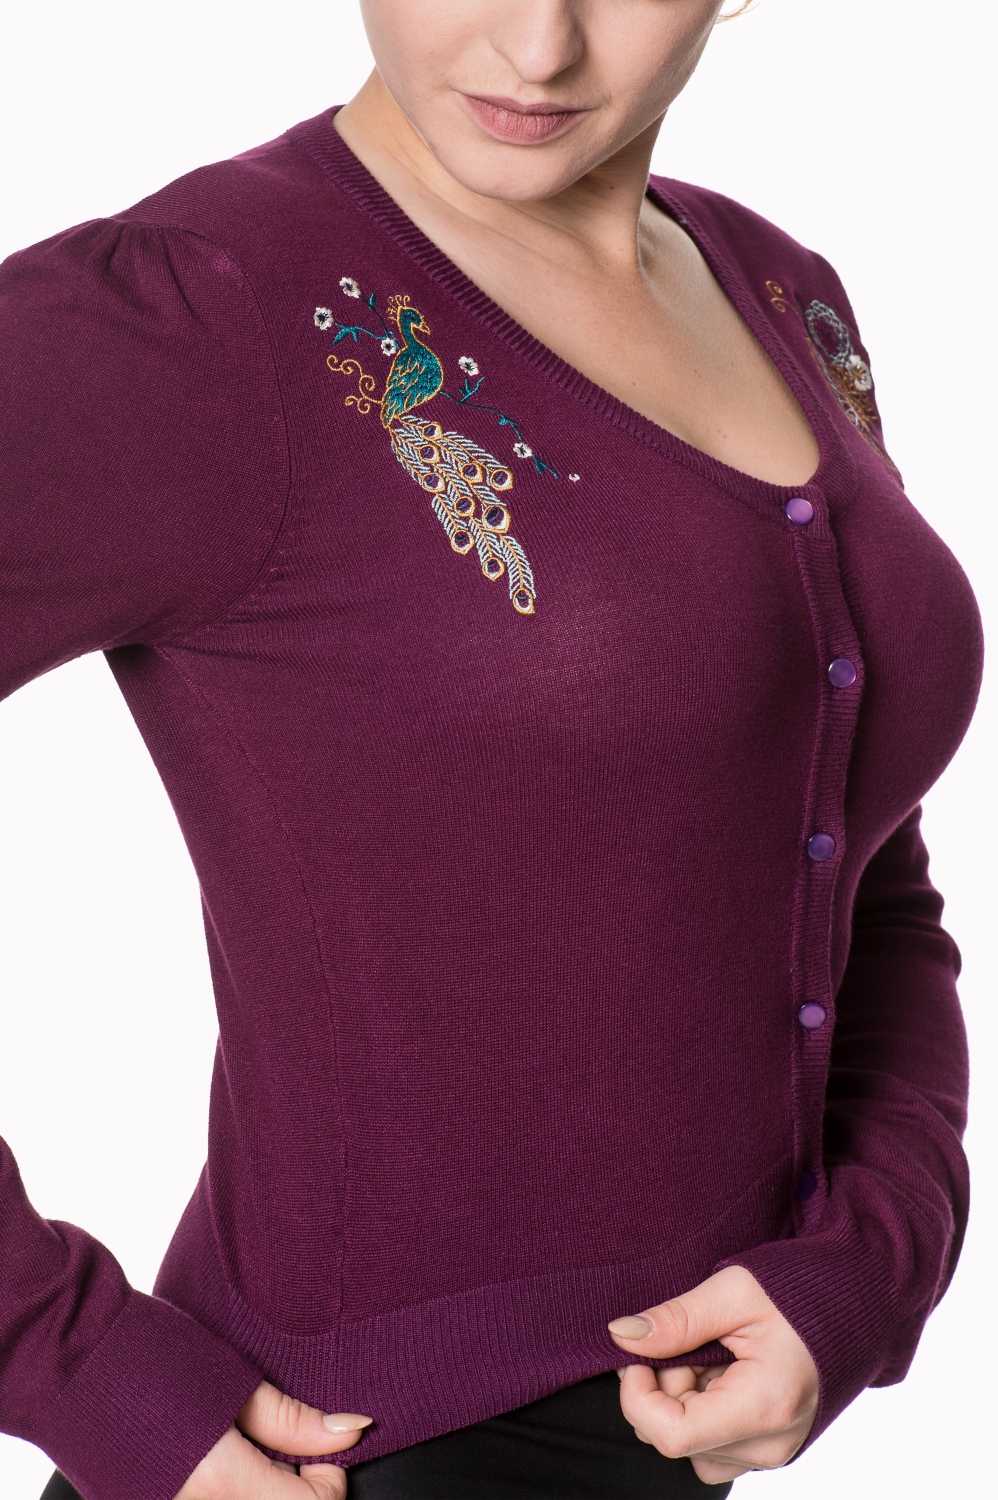 Aubergine Stand Out From The Crowd Peacock Cardigan